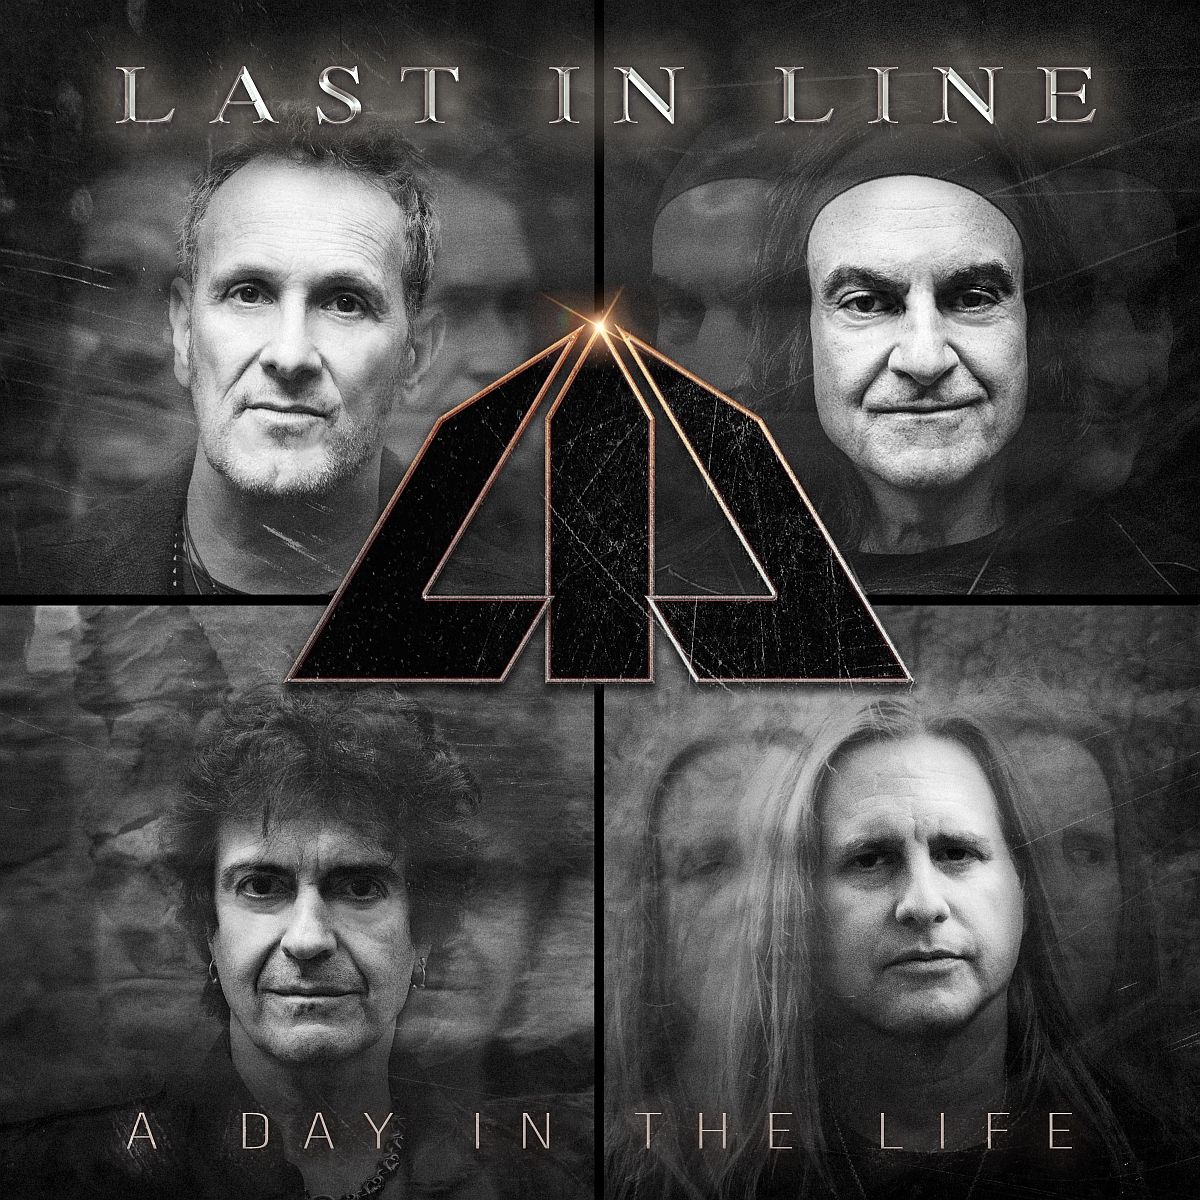 'A Day In The Life'-Musikvideo ist online